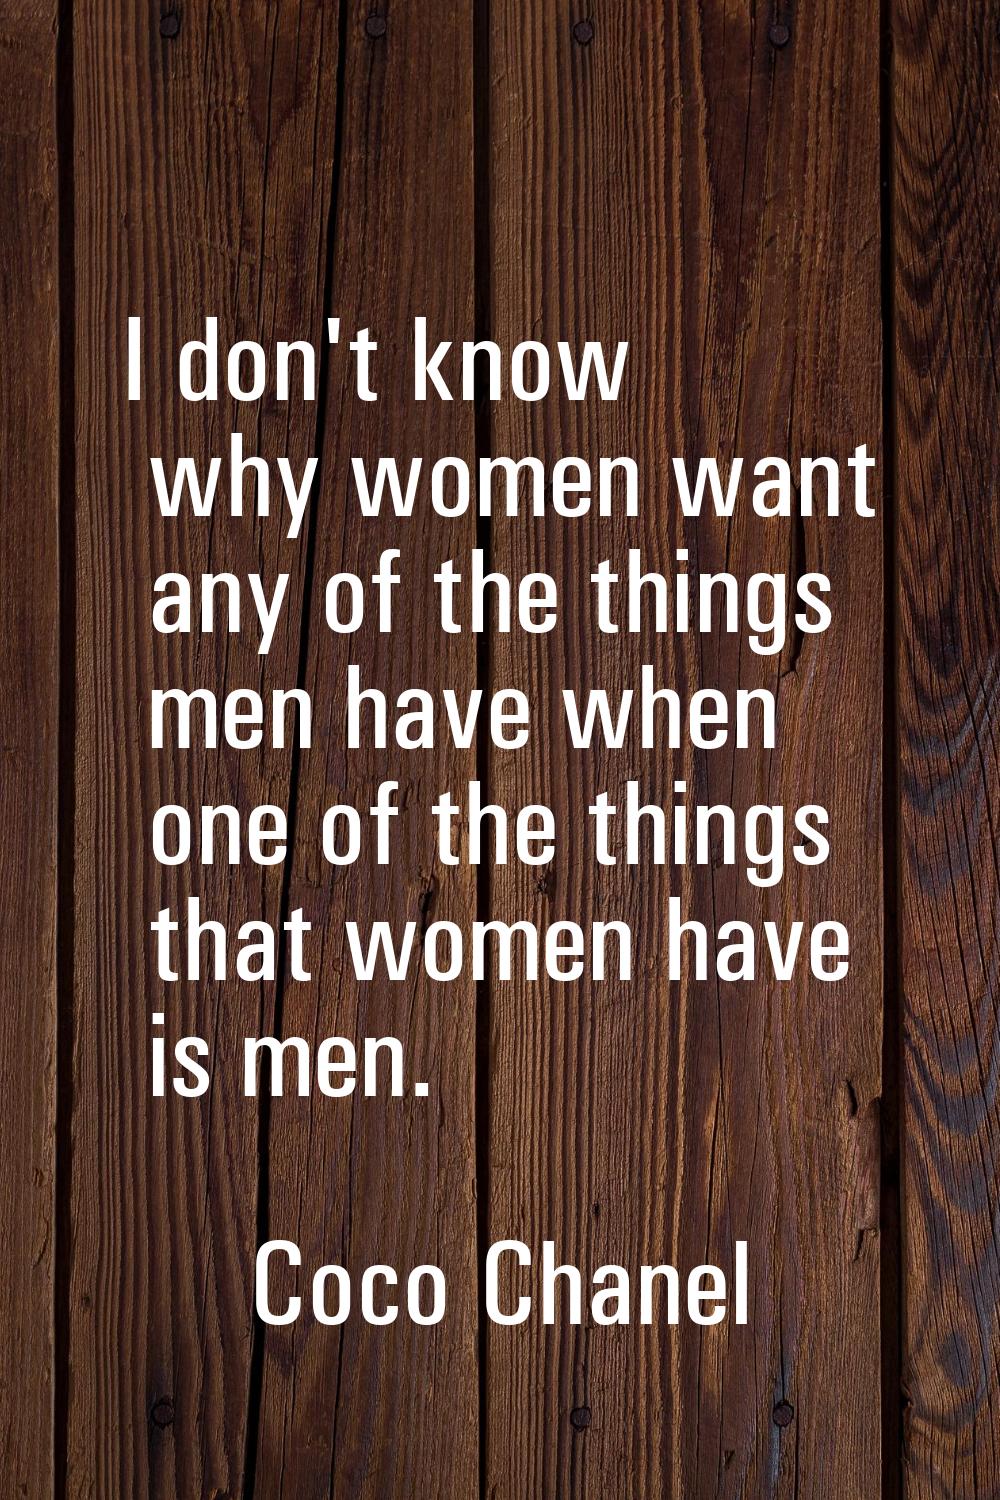 I don't know why women want any of the things men have when one of the things that women have is me